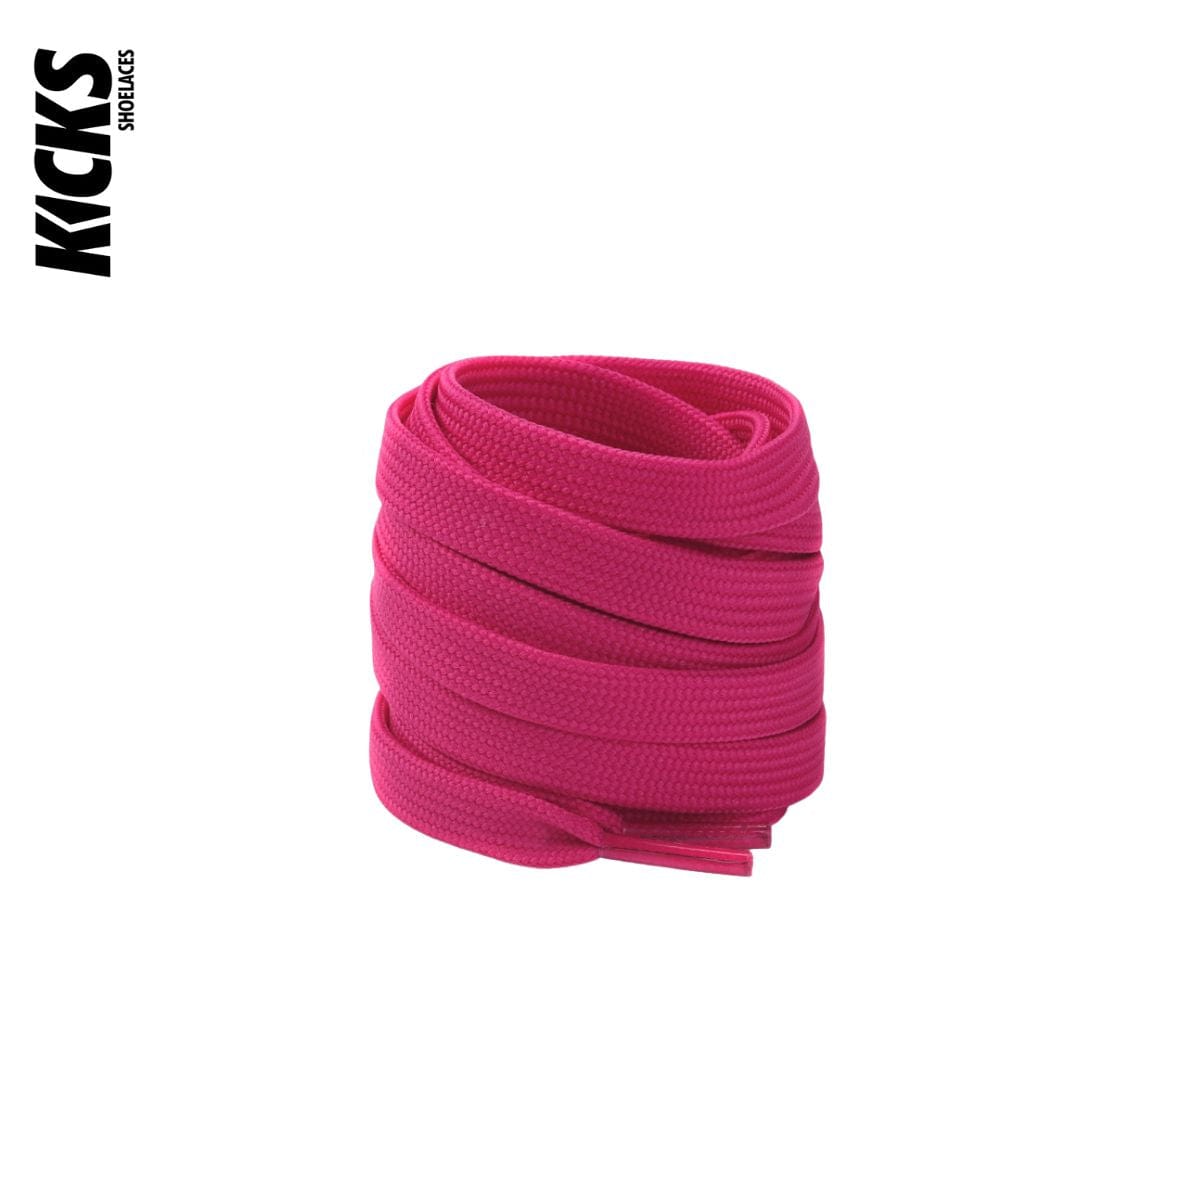 Rose Pink Replacement Laces for Adidas EQT Sneakers by Kicks Shoelaces